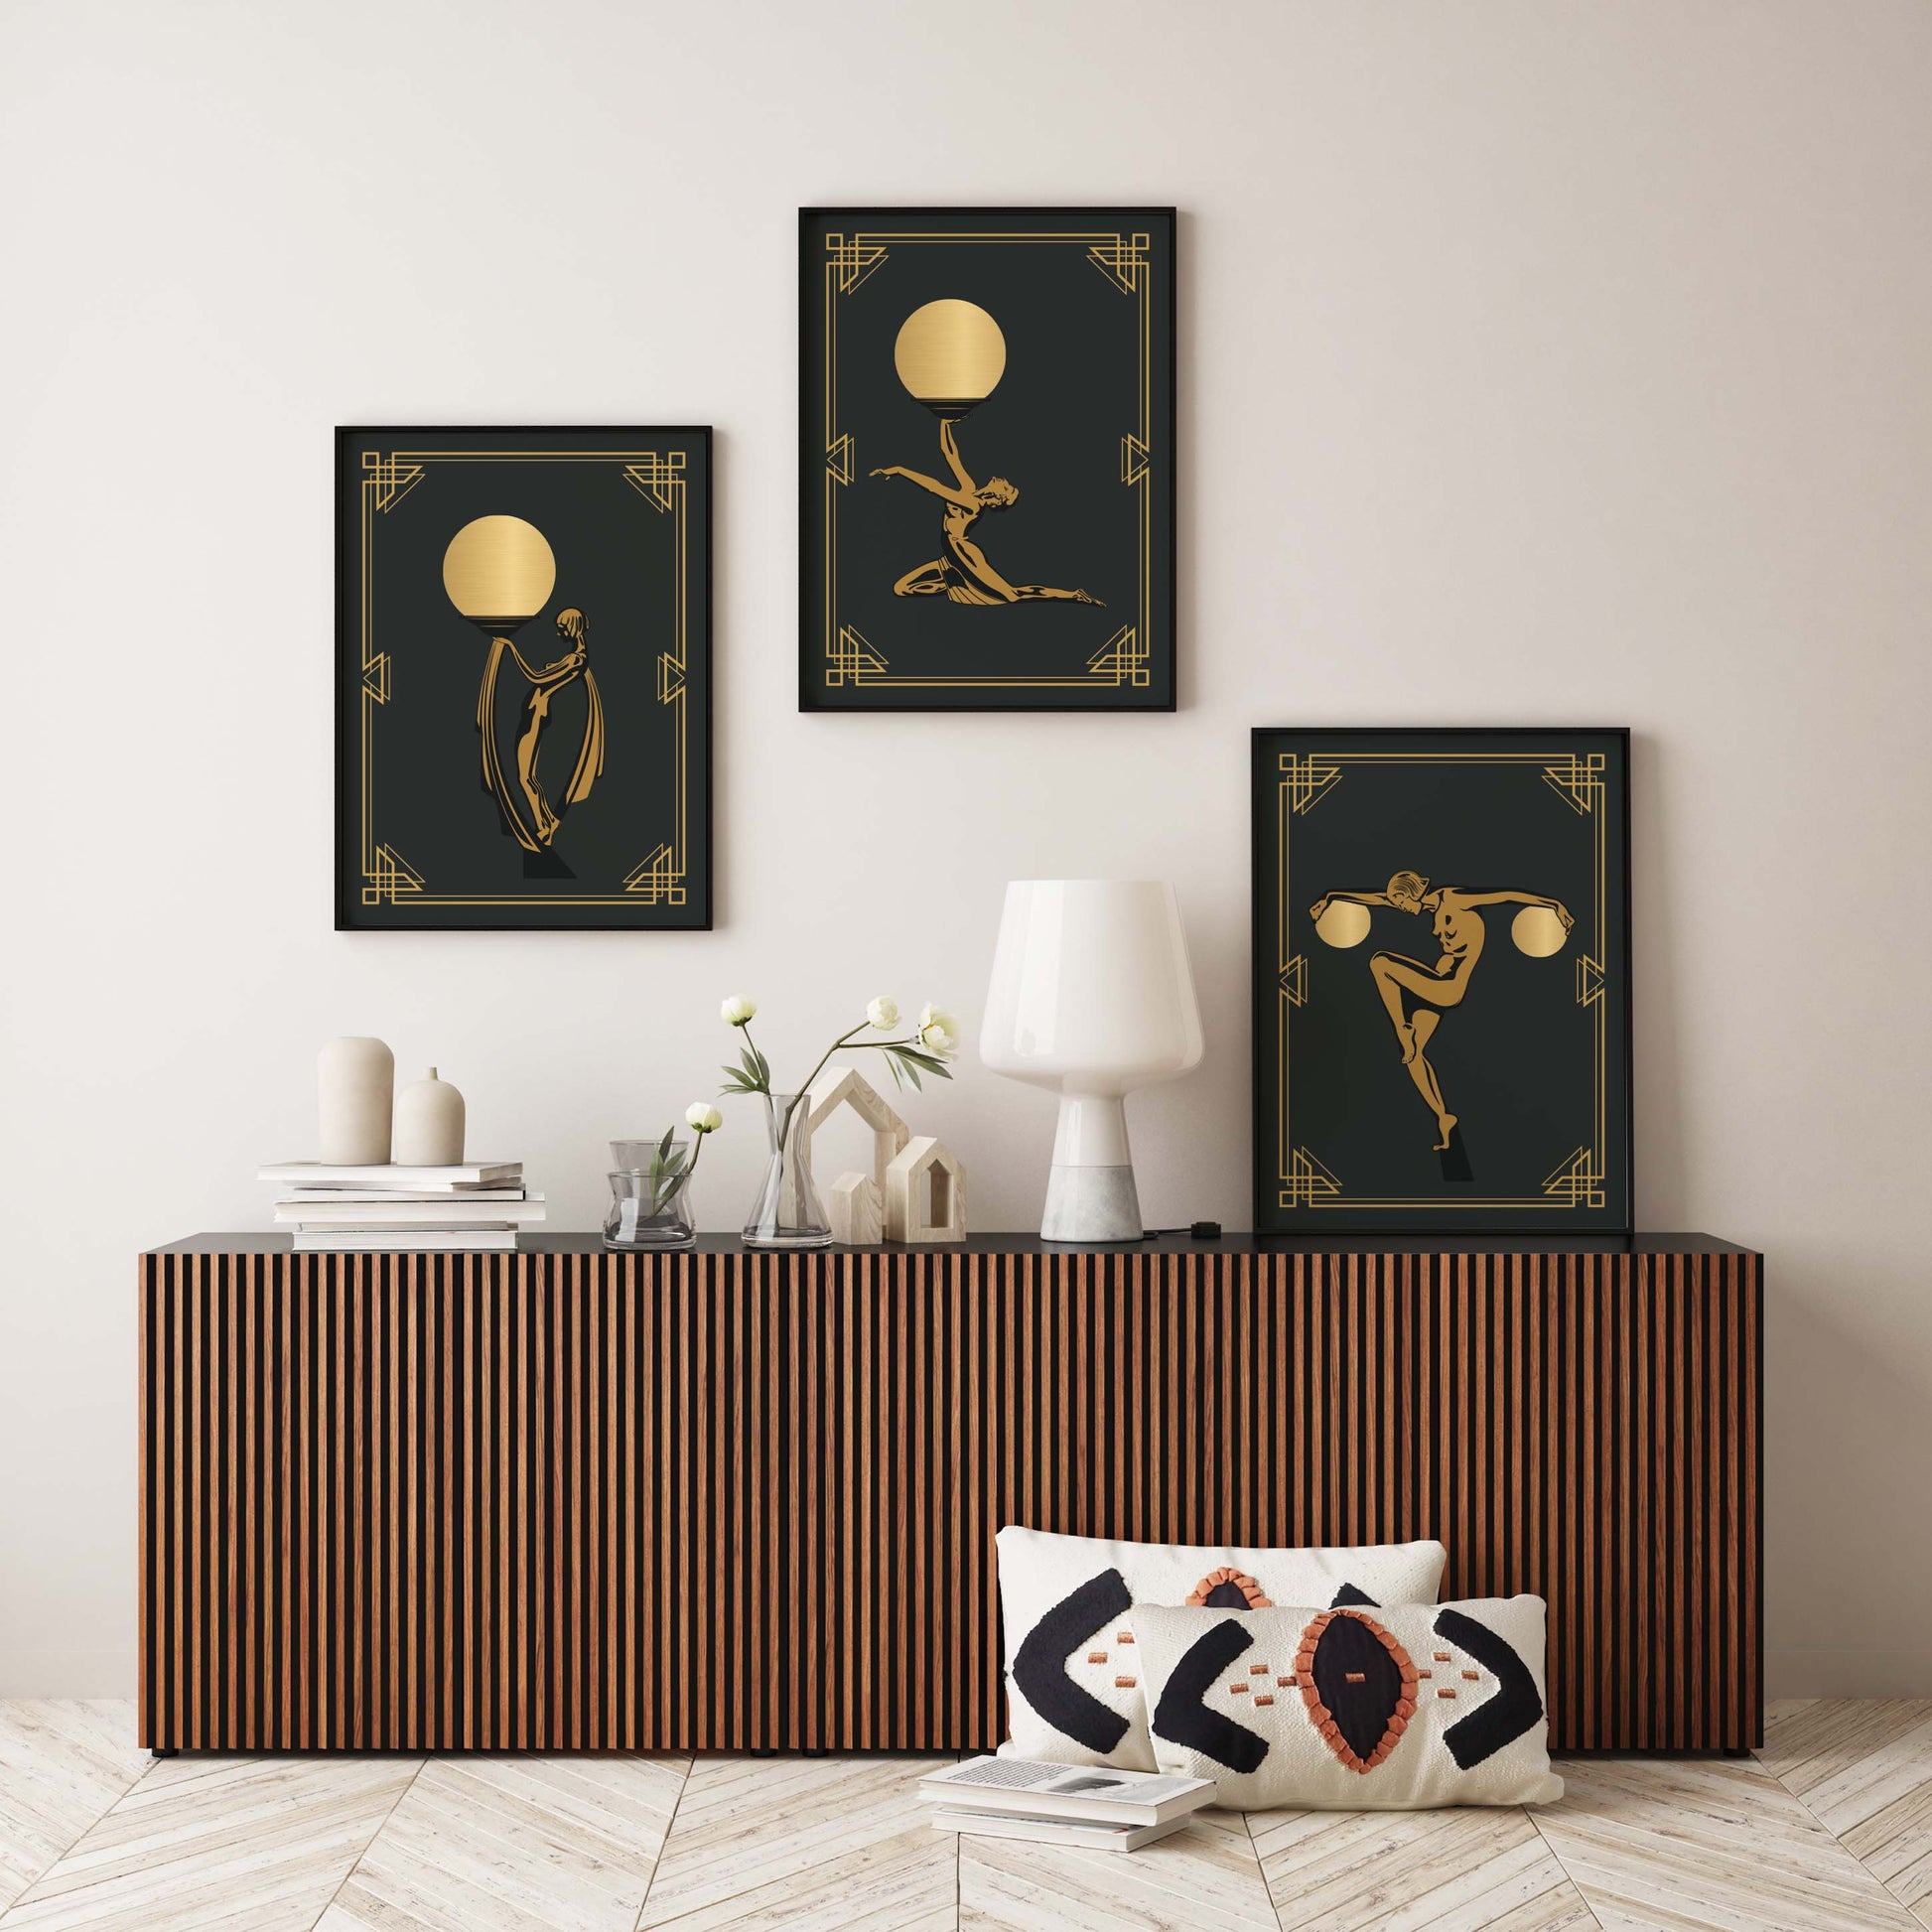 Art deco prints in black and gold, set of 3 posters